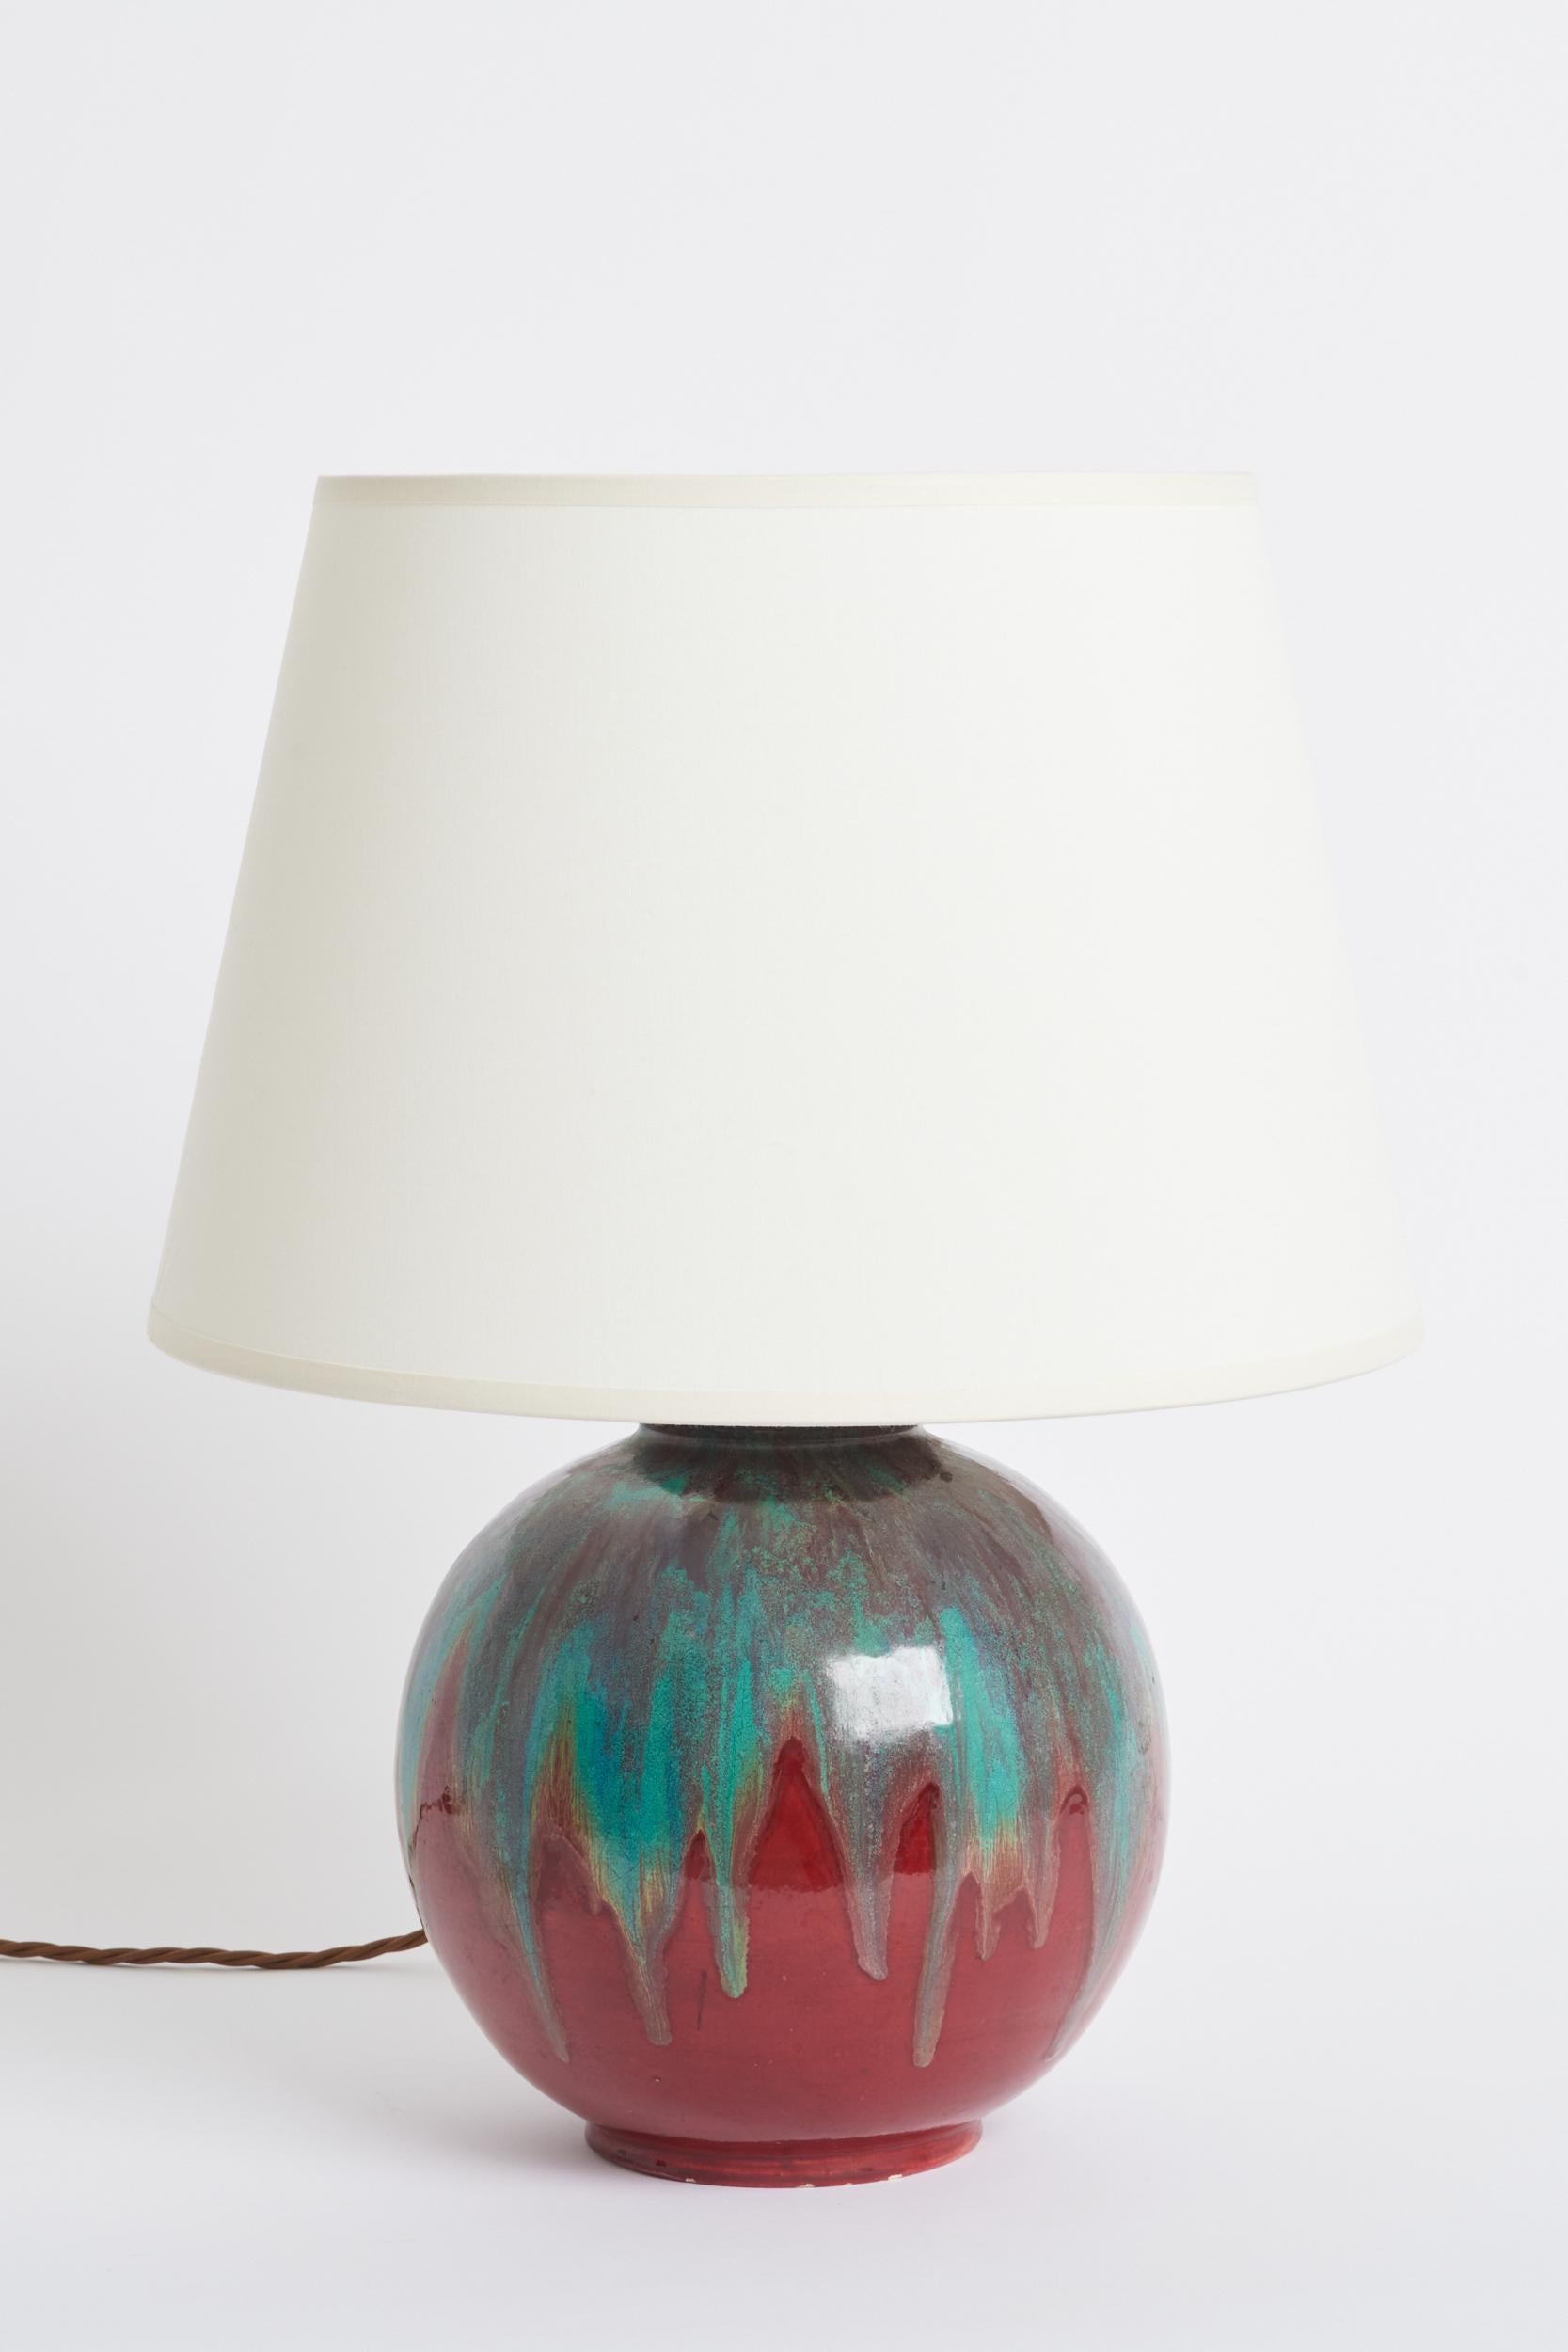 A polychrome ceramic table lamp by Félix Gete (1870-1959) for CAB (Ceramique d'Art de Bordeaux). Sang de boeuf with turquoise dripping enamel. Signed and stamped. 
France, 1920s
With the shade: 44.5 cm high by 30.5 cm diameter
Lamp base only: 28 cm